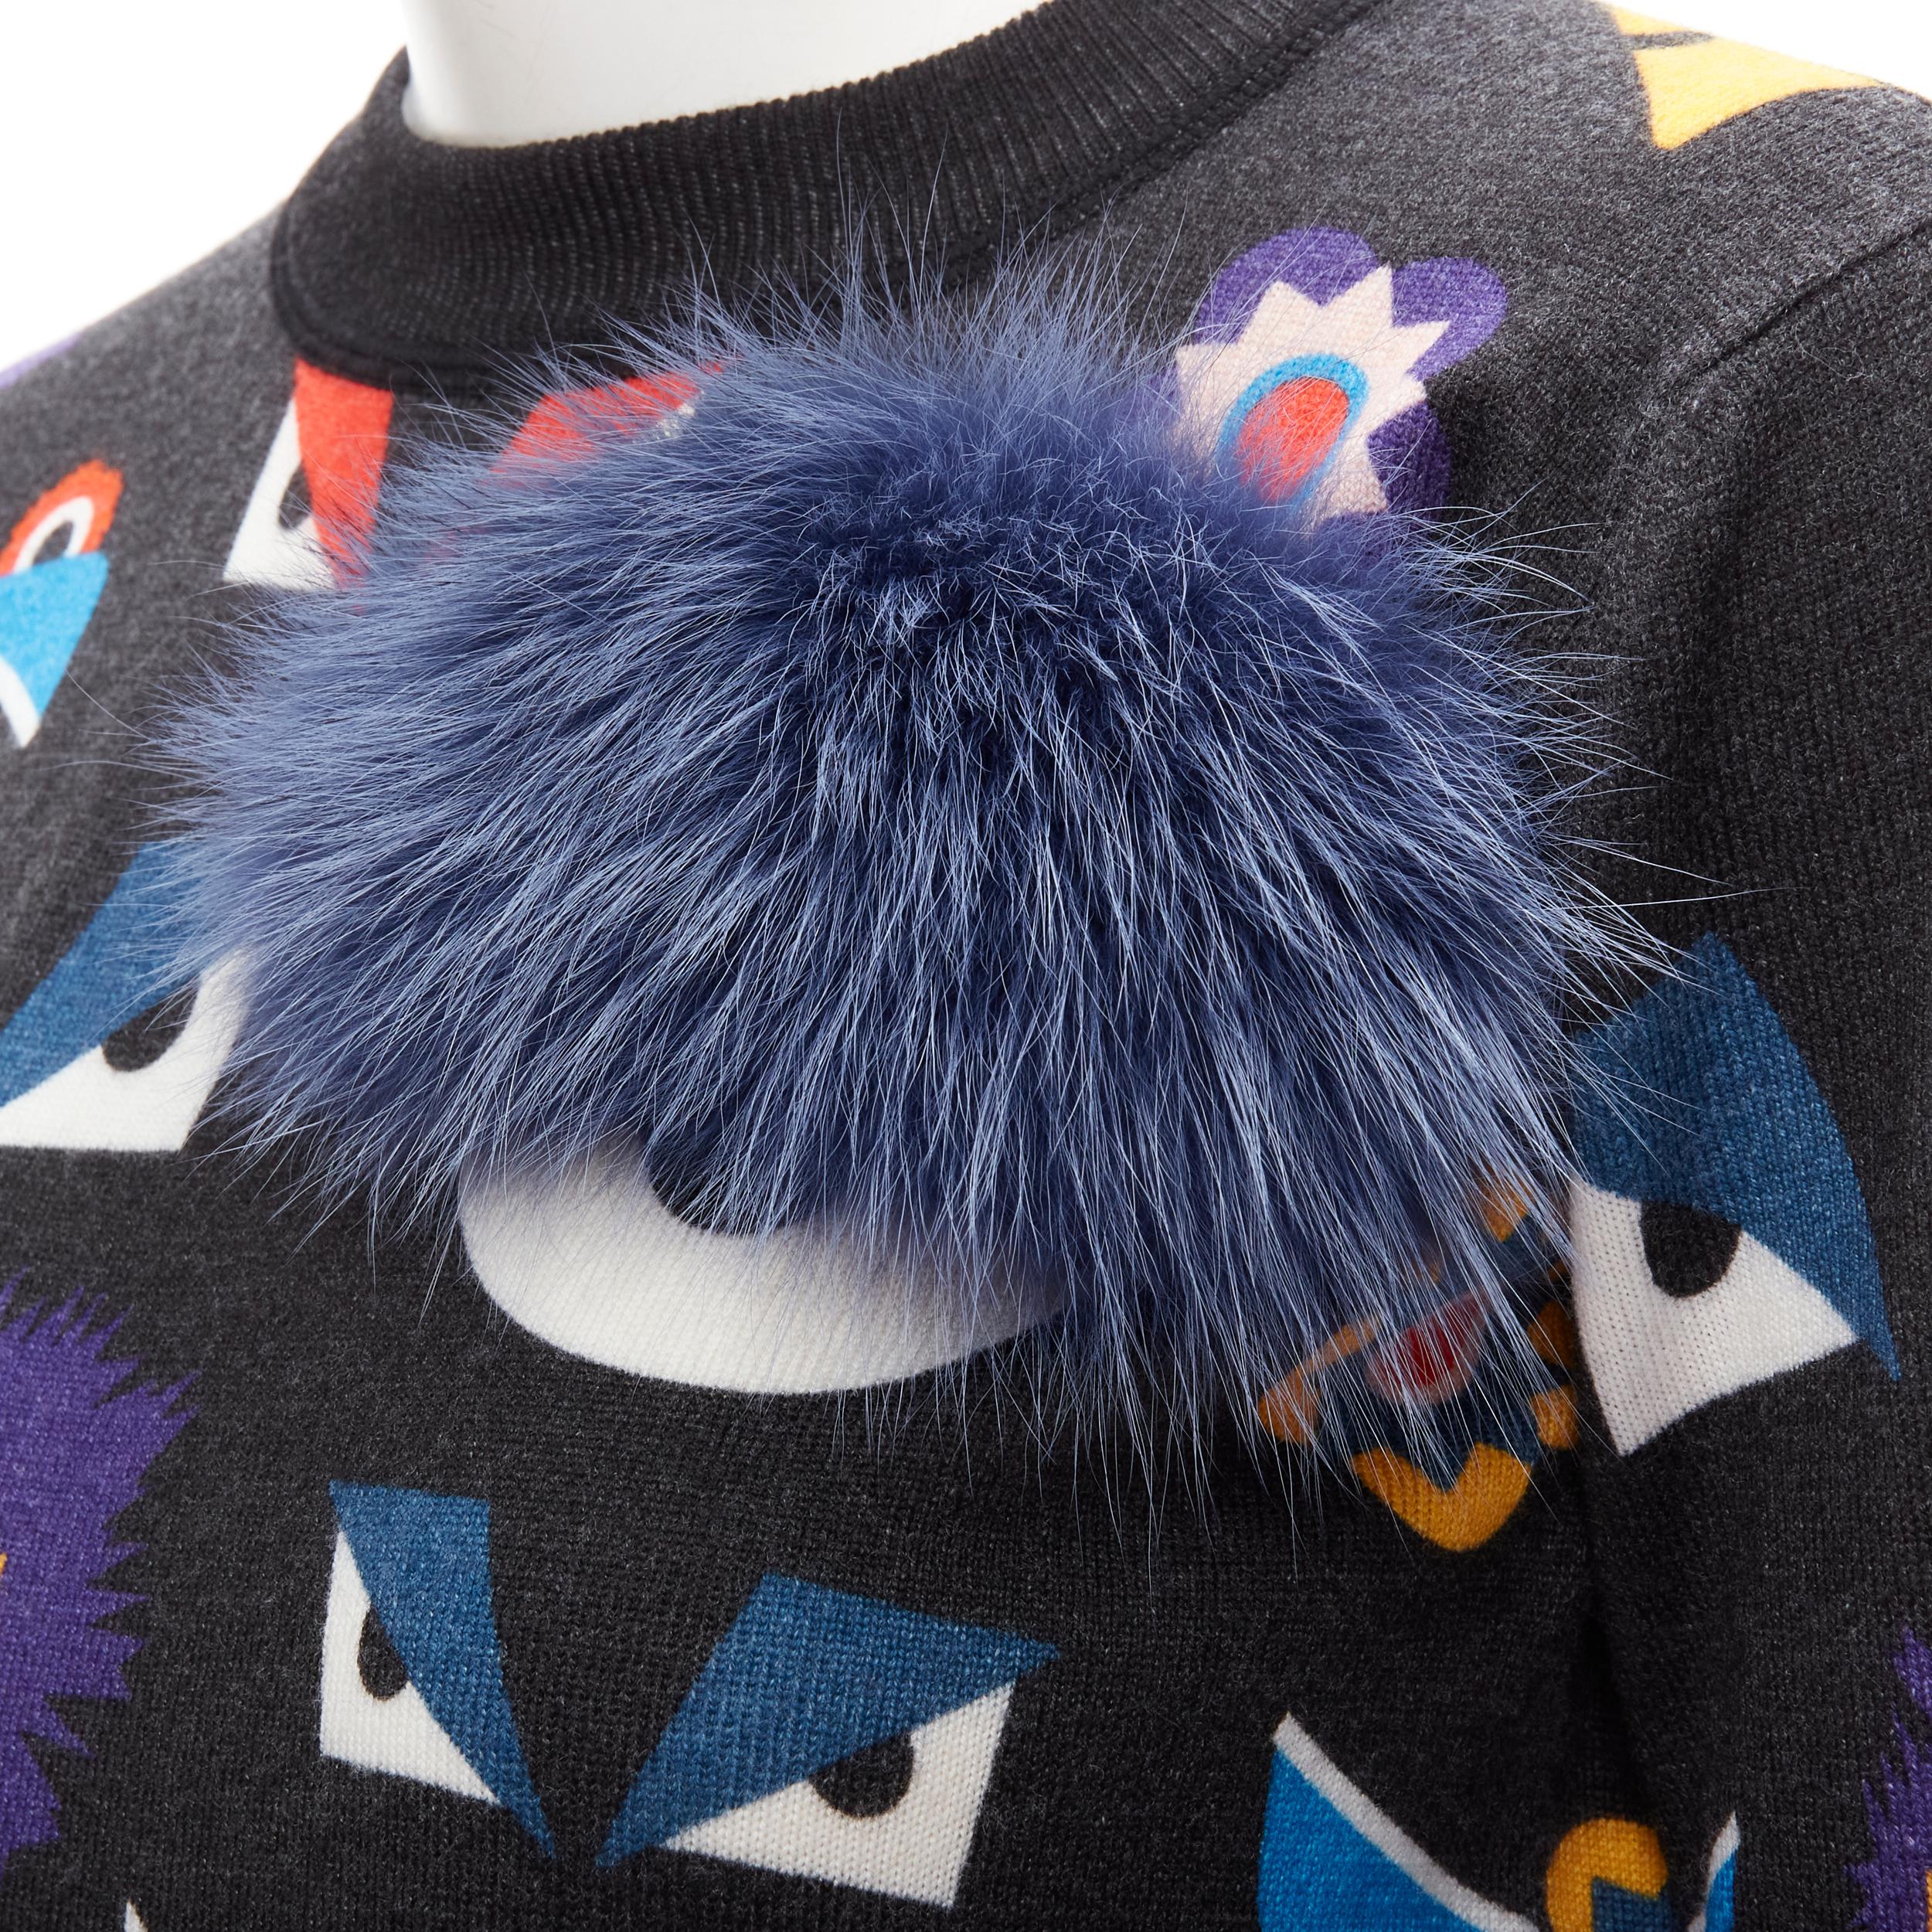 FENDI Monster Bug Eye blue fox fur trim dark grey cropped wool sweater S 
Reference: ANWU/A00468 
Brand: Fendi 
Collection: Monster Bug 
Material: Wool 
Color: Grey 
Extra Detail: Dark grey with Monster bug eye. Blue for fur trim at chest. 
Made in: